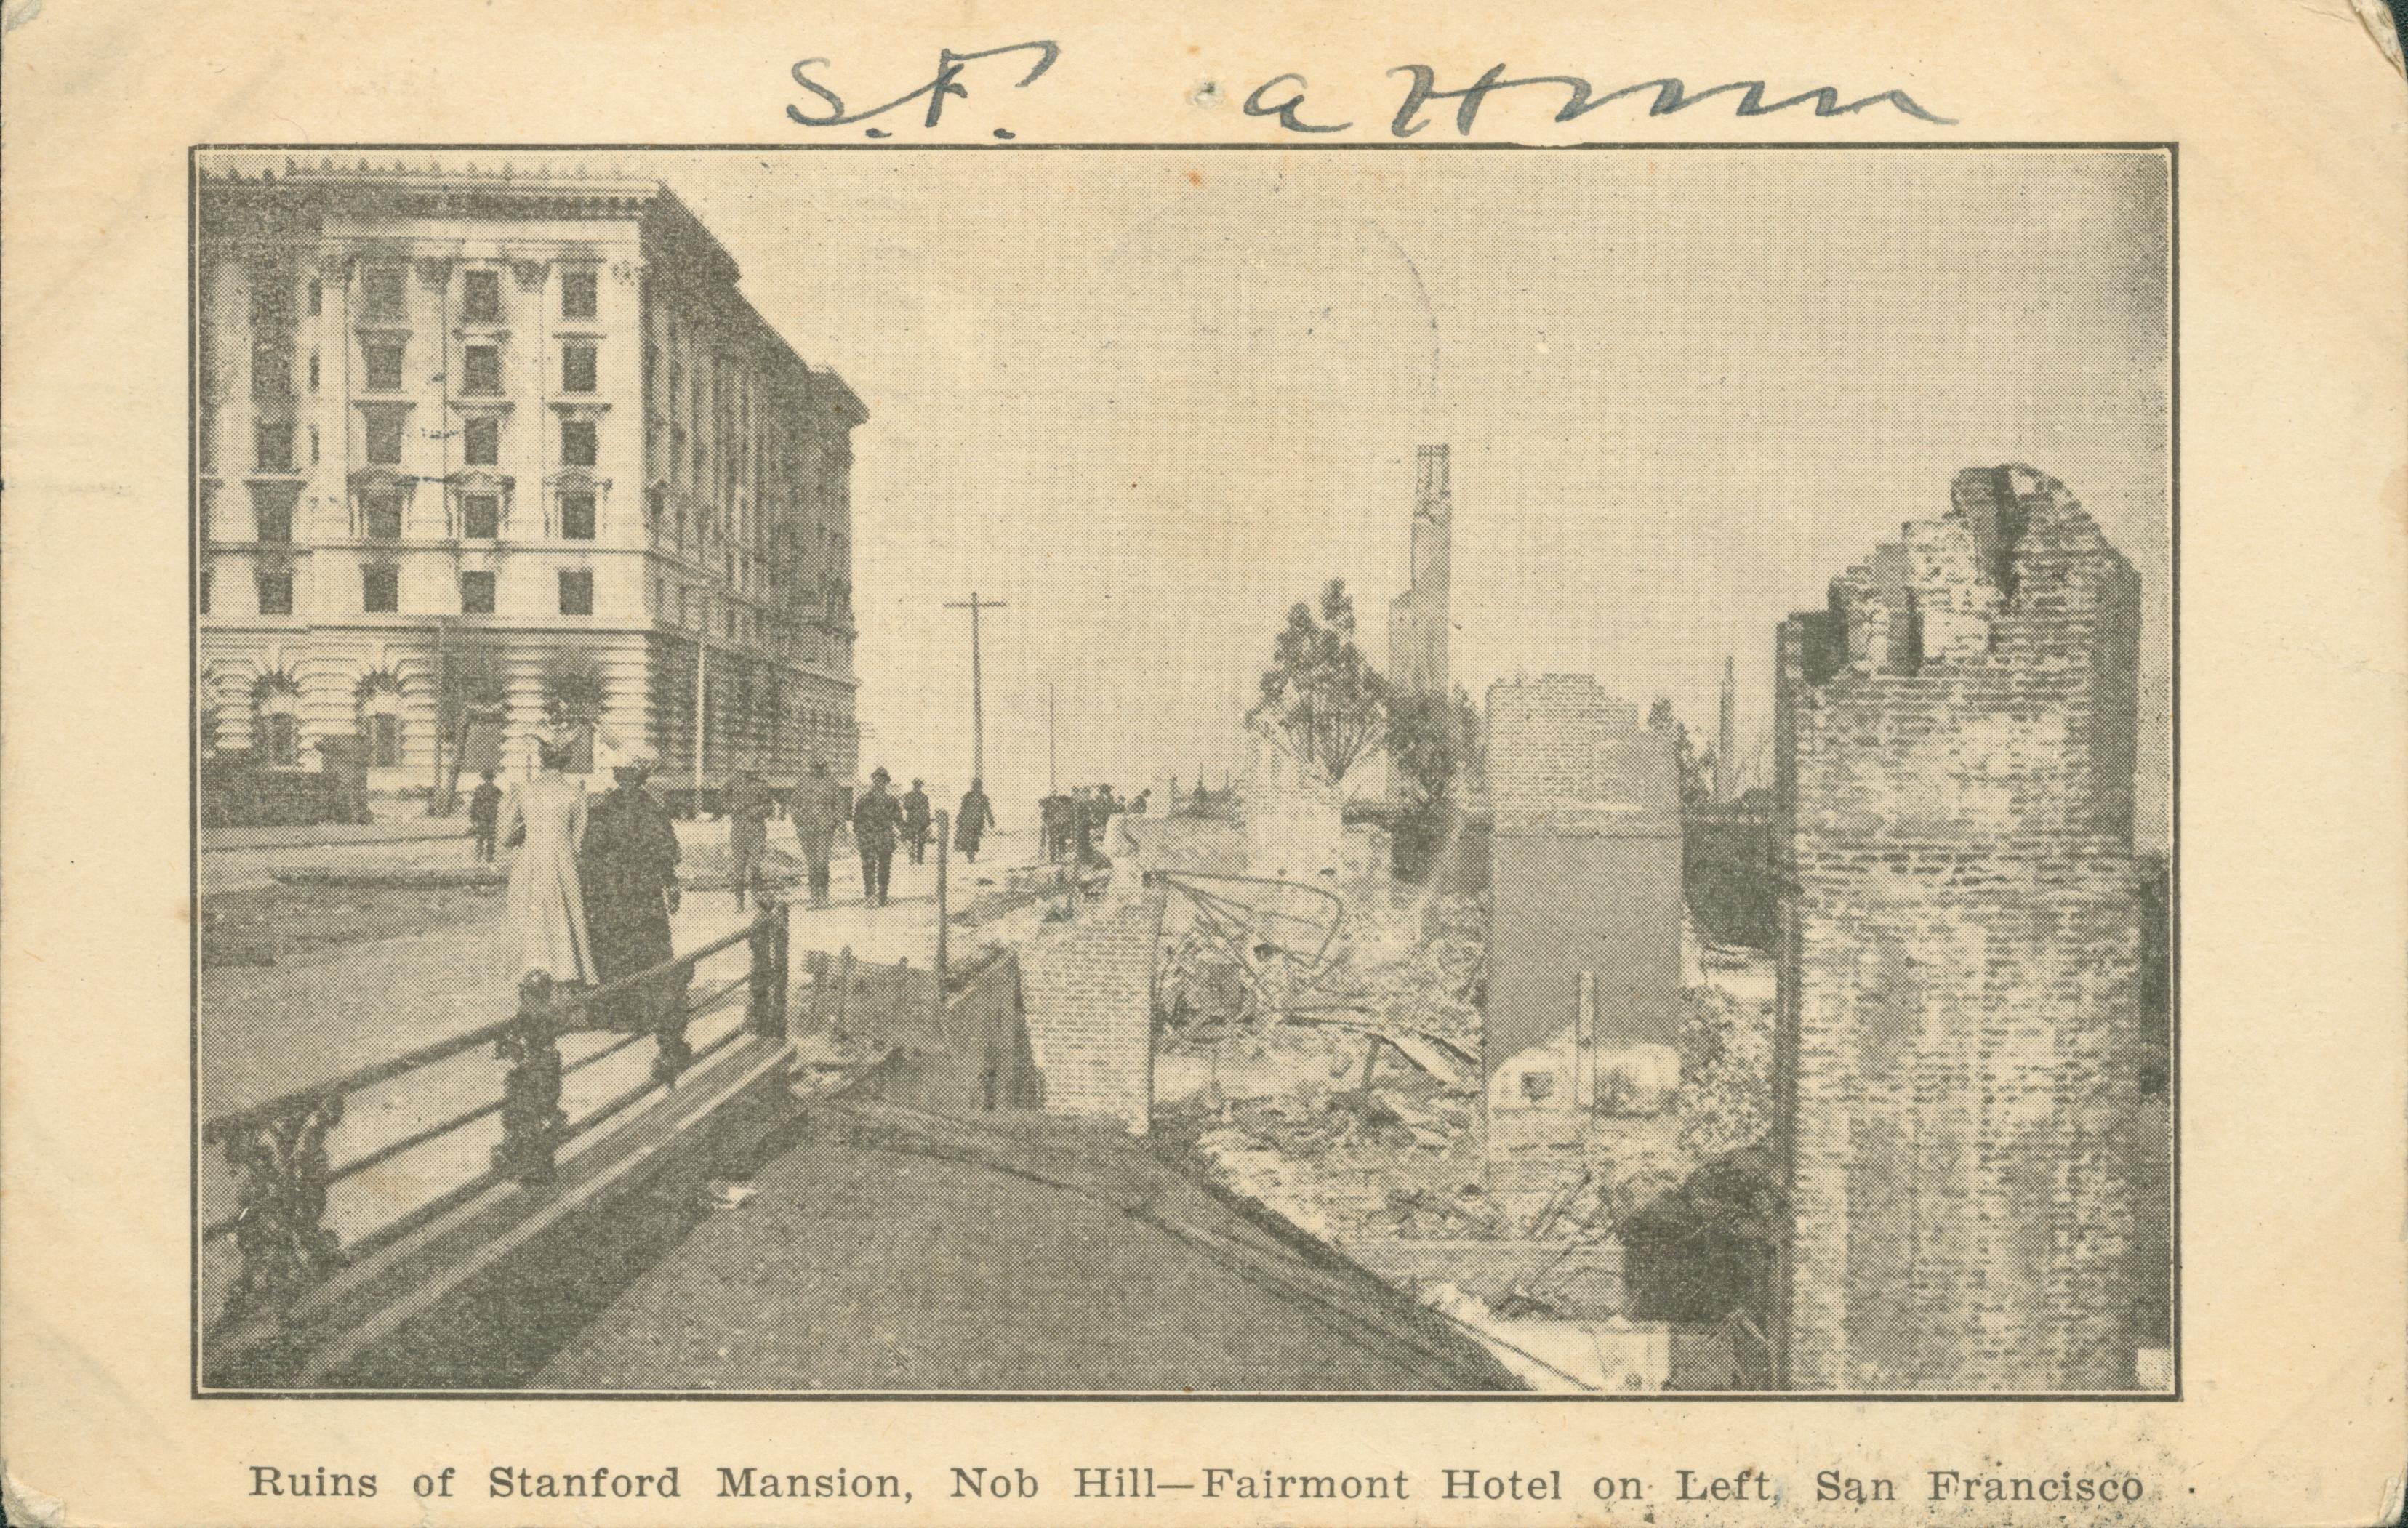 Photo of the ruins of the Stanford Mansion with the seemingly undamaged Fairmont Hotel to the left.